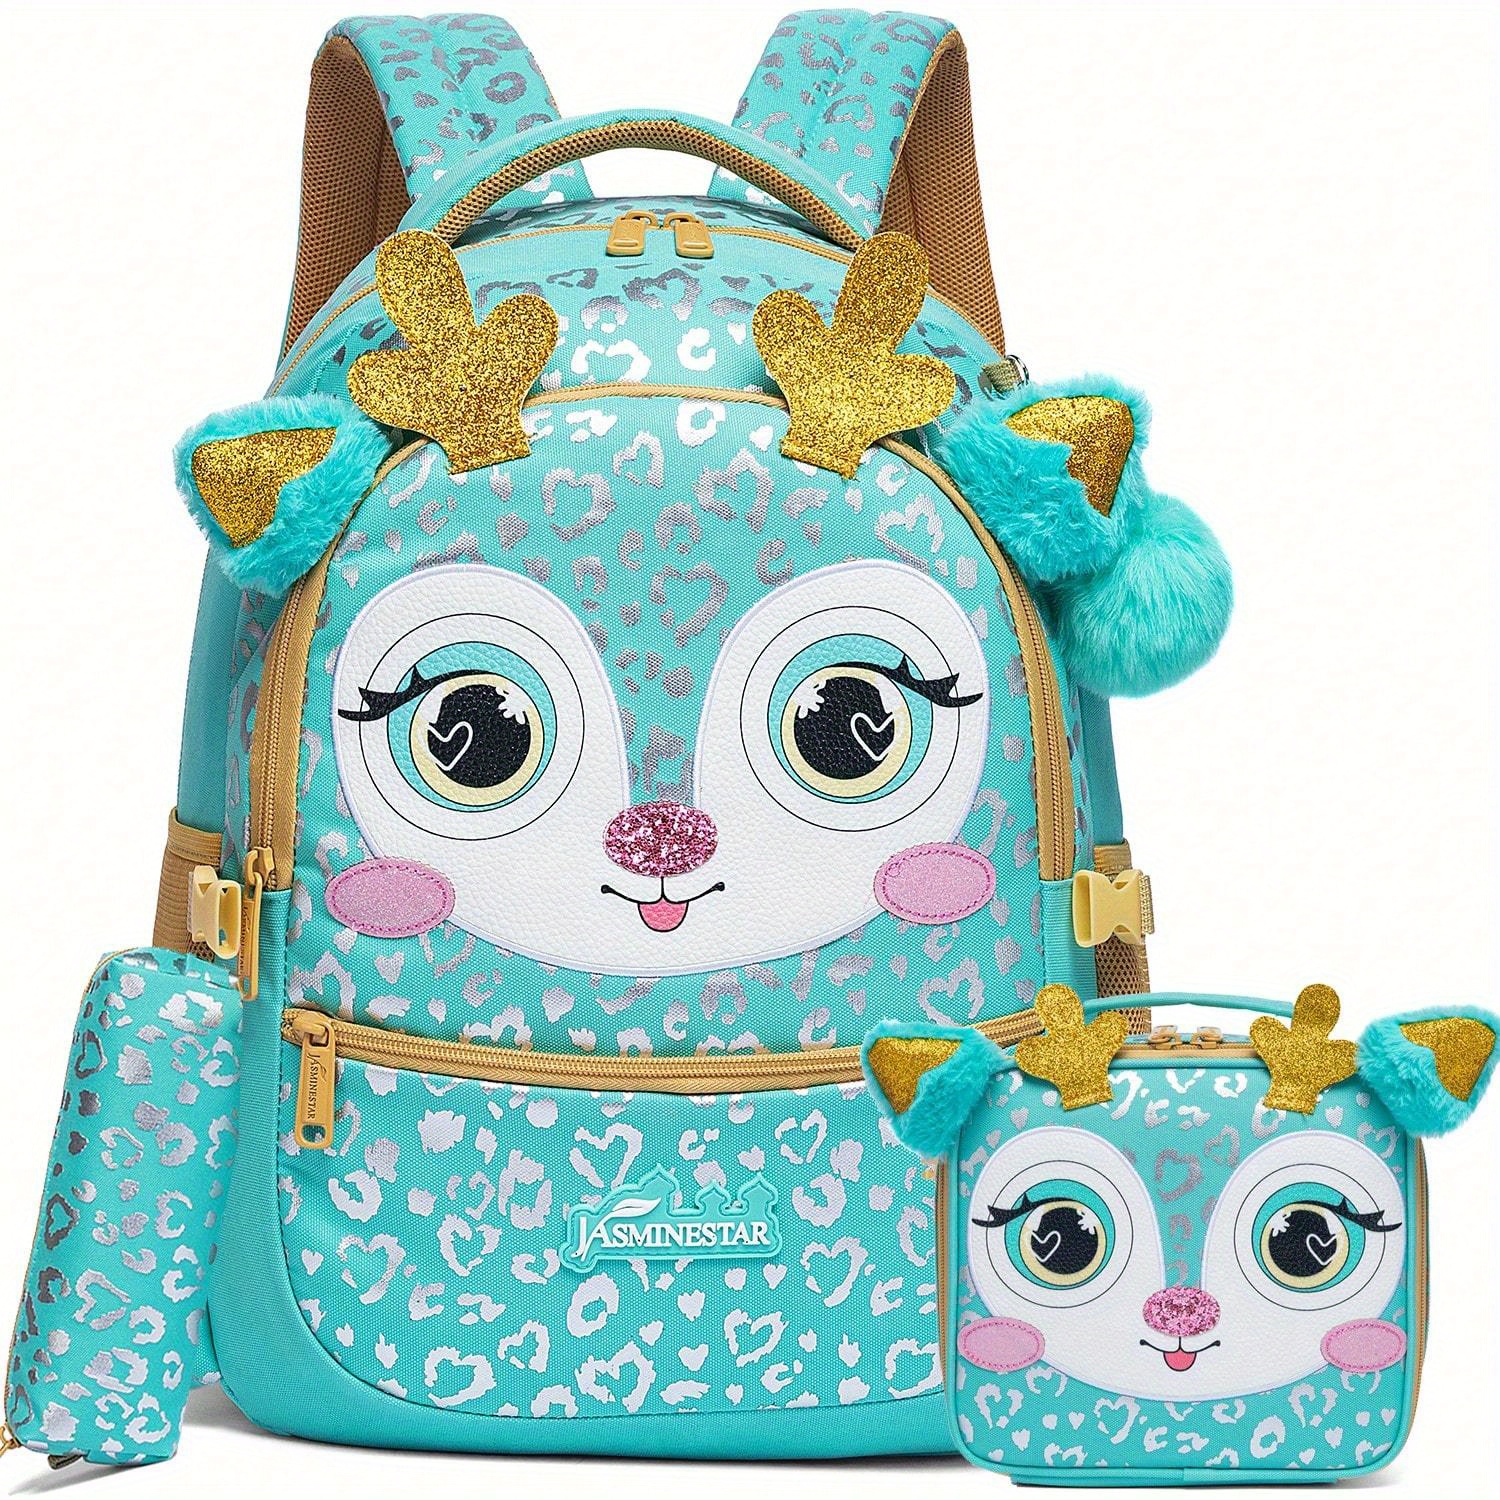 

Adorable Girls' Backpack Set With Lunch Box & Pencil Case - Lightweight, Adjustable Straps For Ages 3-14, Perfect For School & Travel Backpack Purse For Women Mini Backpack For Women